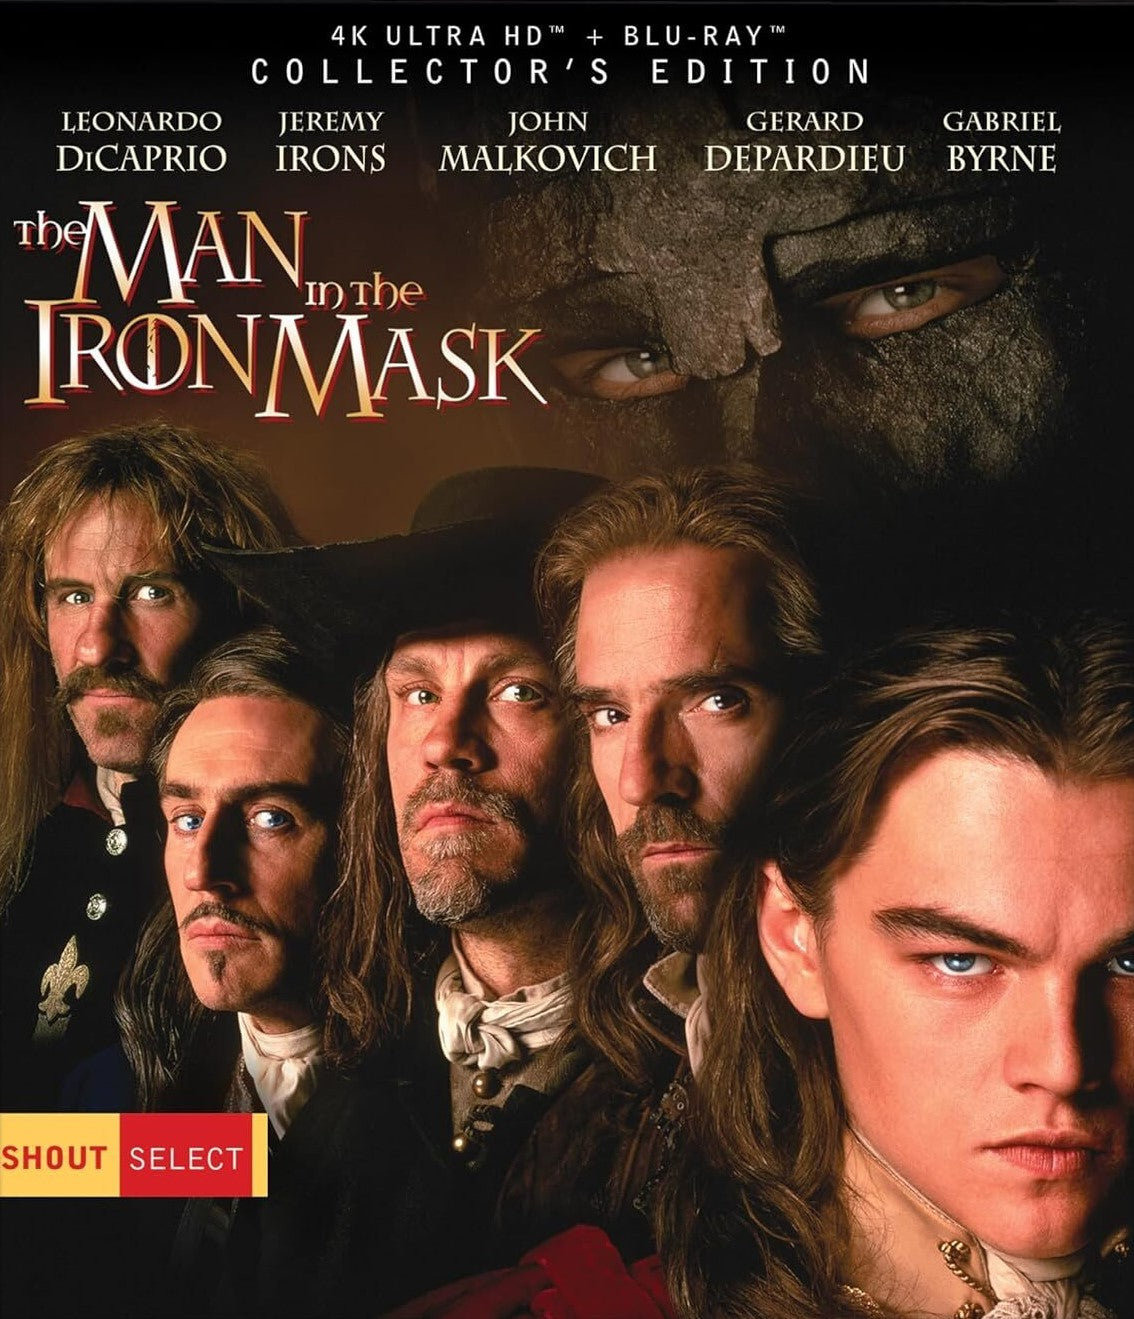 THE MAN IN THE IRON MASK (COLLECTOR'S EDITION) 4K UHD/BLU-RAY